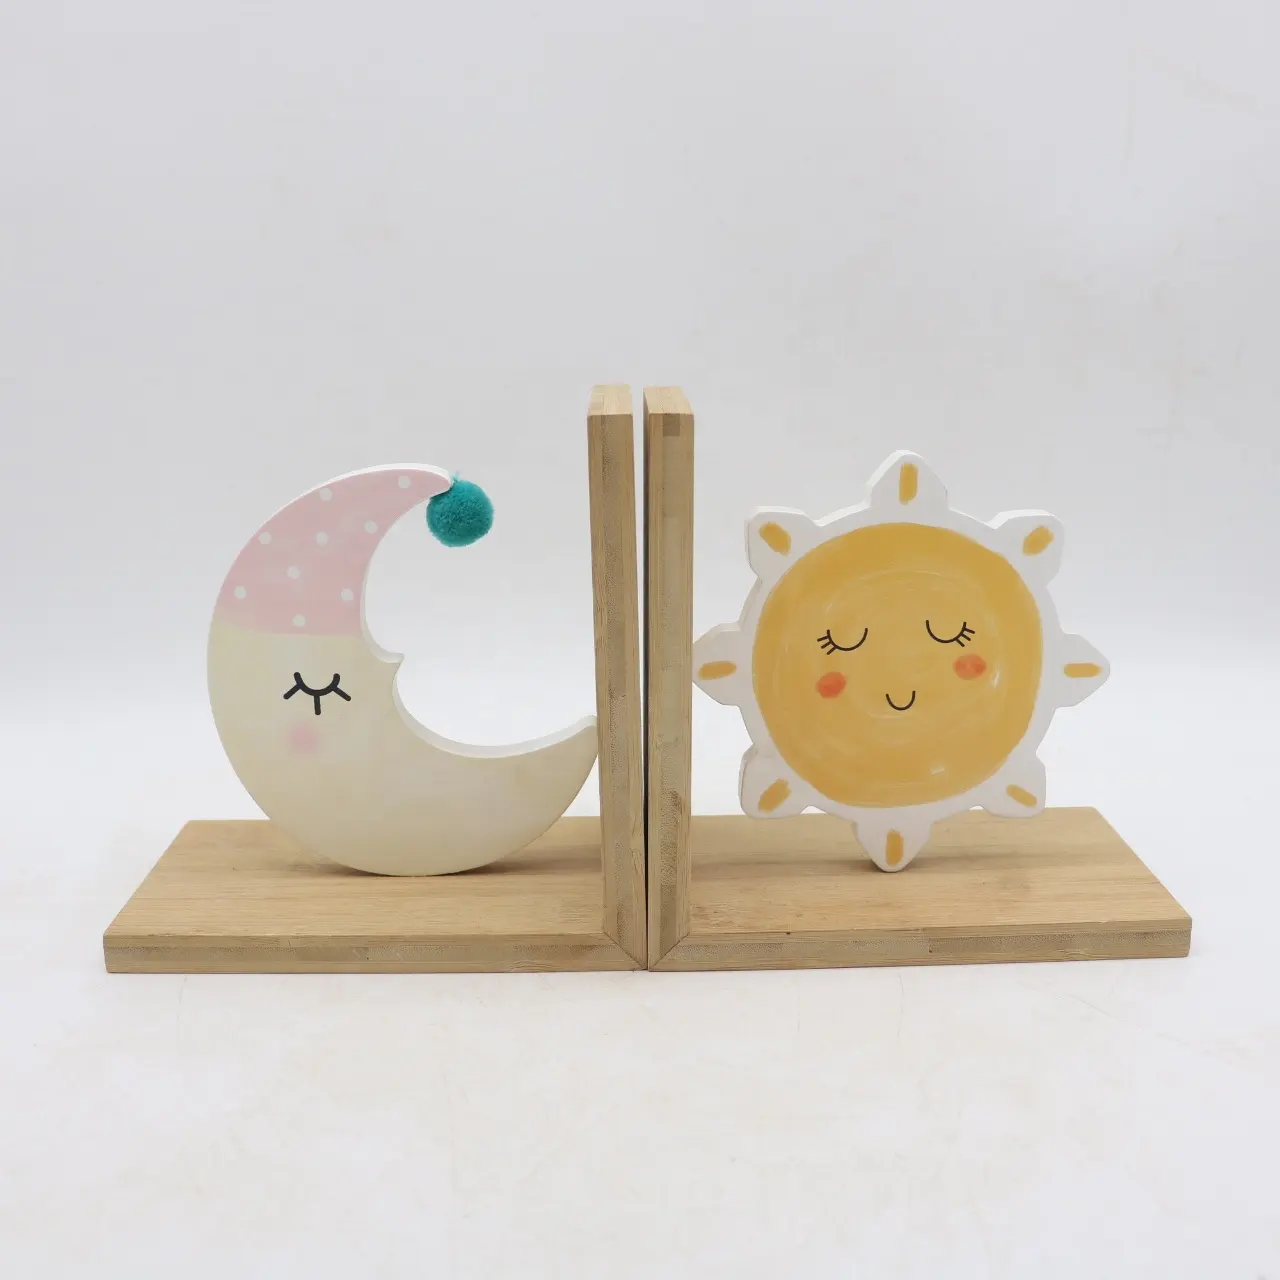 2022 kIDS Wooden Decorate bookend decorations for home other home decor baby room Children baby Sun moon